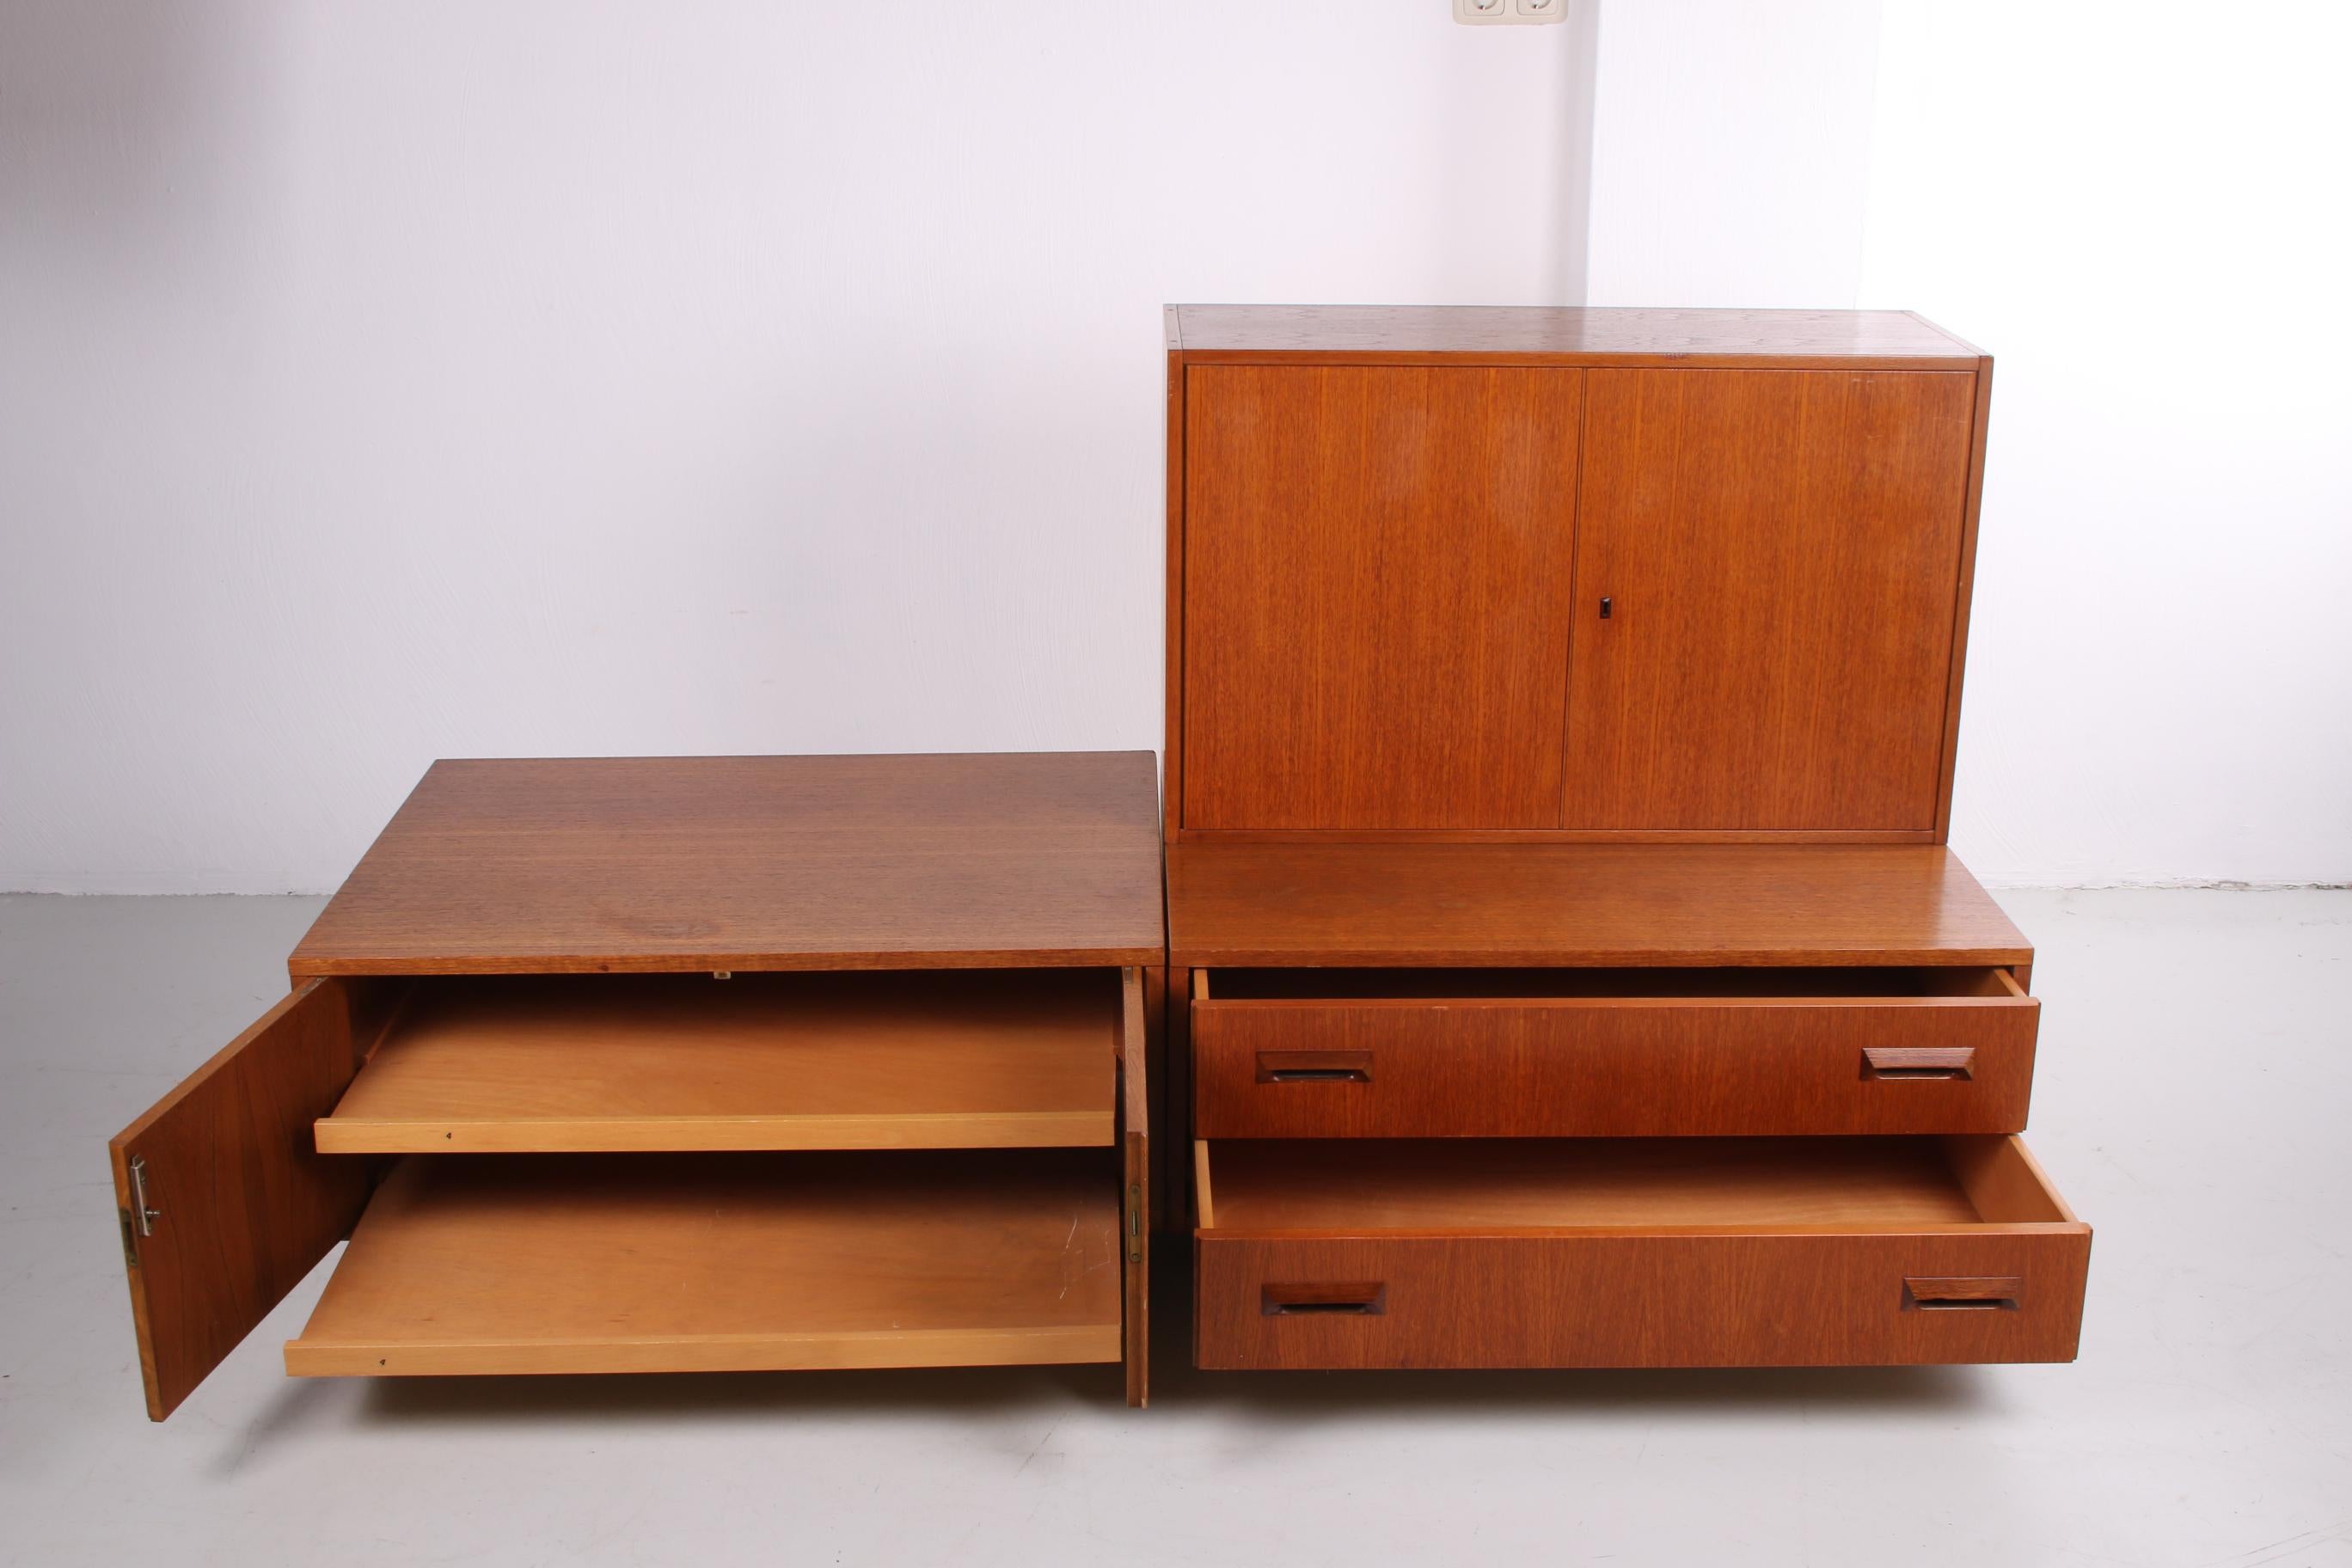 Veneer Vintage Tv Furniture with Two Drawers and Three Separate Cabinets with Metal Leg